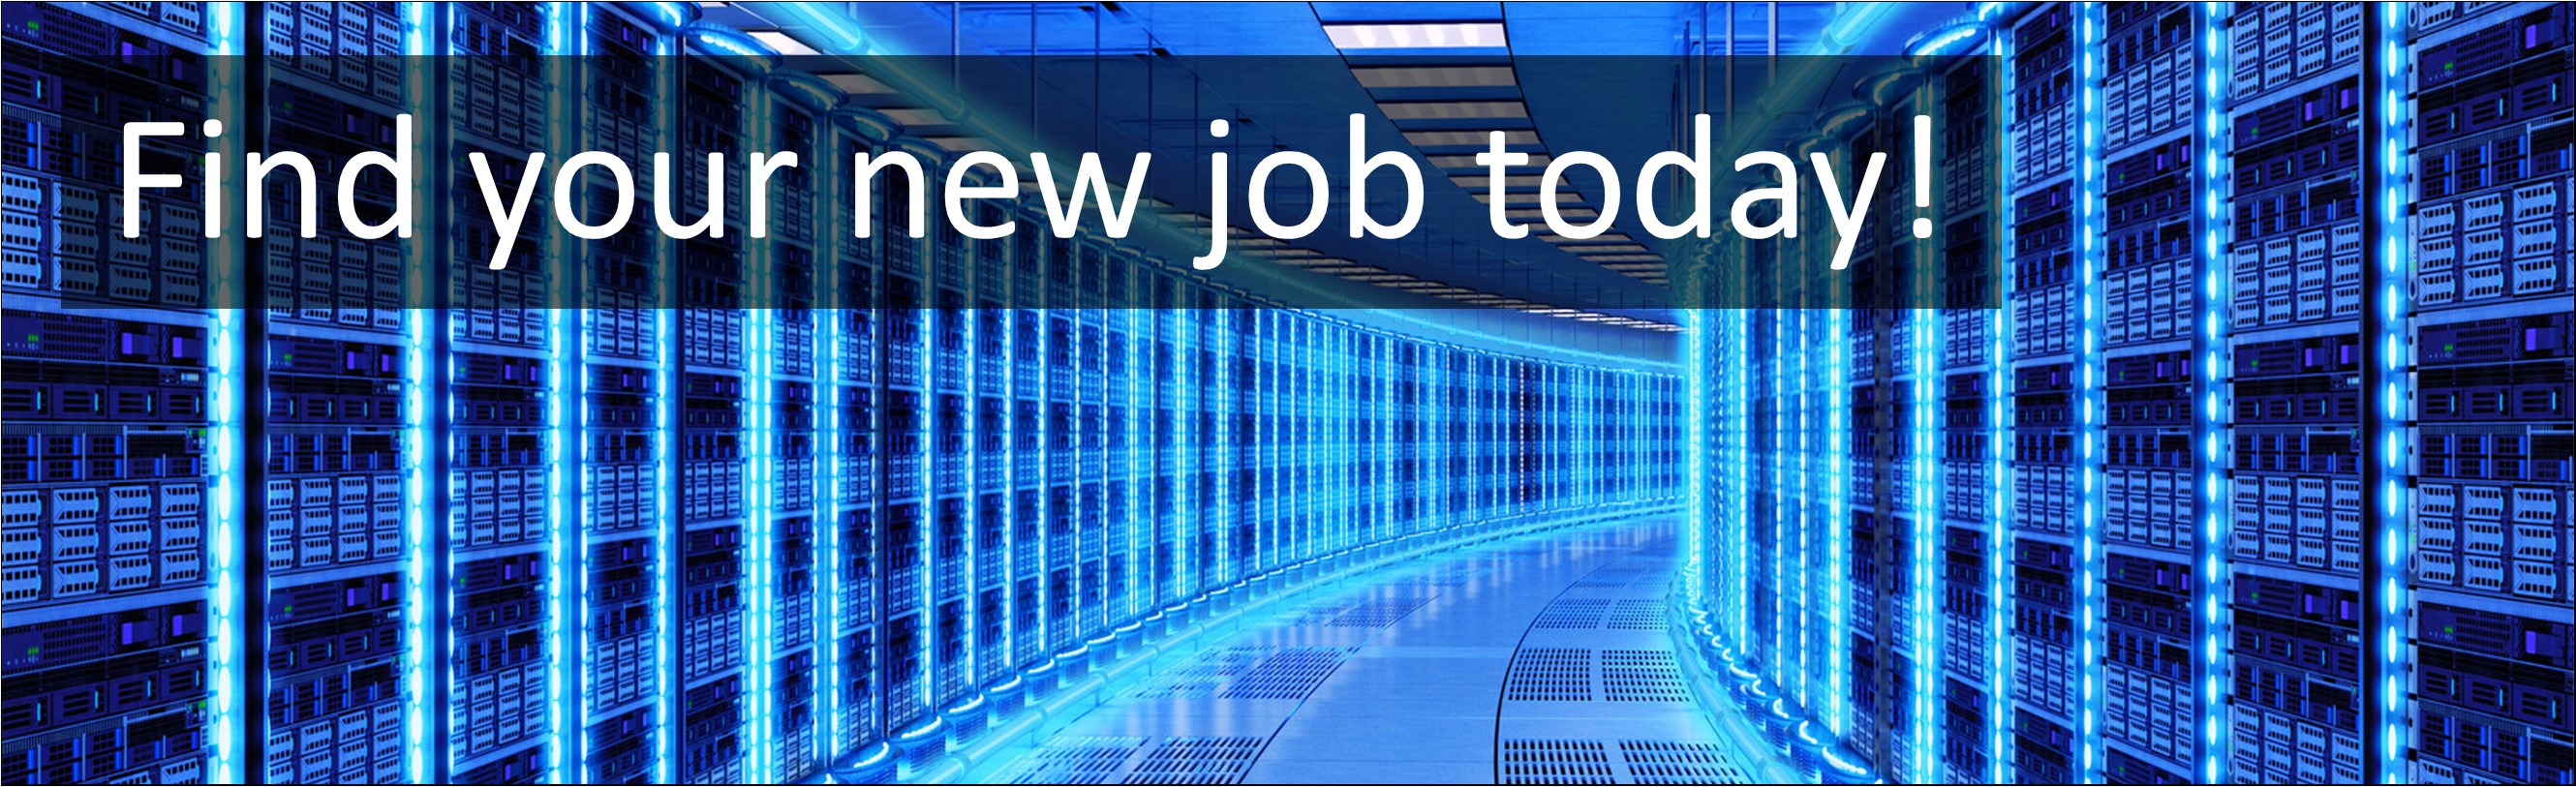 IT & Communication Jobs. Software Development Engineer in Test / SDET / C# .Net Developer Jobs, Careers & Vacancies in Lincoln, Lincolnshire, East Midlands. Advertised by AWD online – Multi-Job Board Advertising and CV Sourcing Recruitment Services